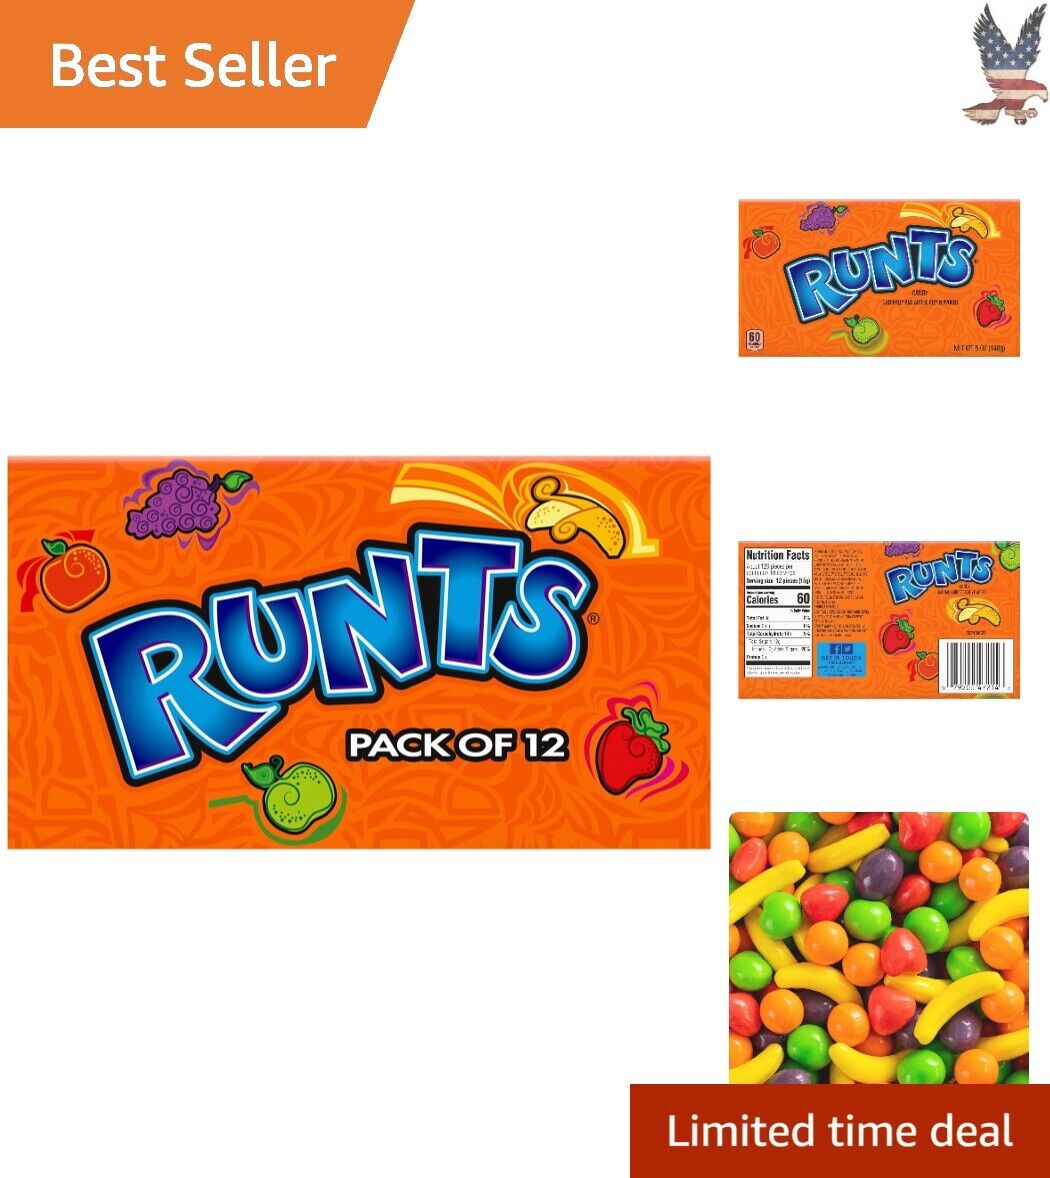 Classic Whimsical Runts Candy - Bursting with Fruity Flavor - 5 Ounce Pack 12